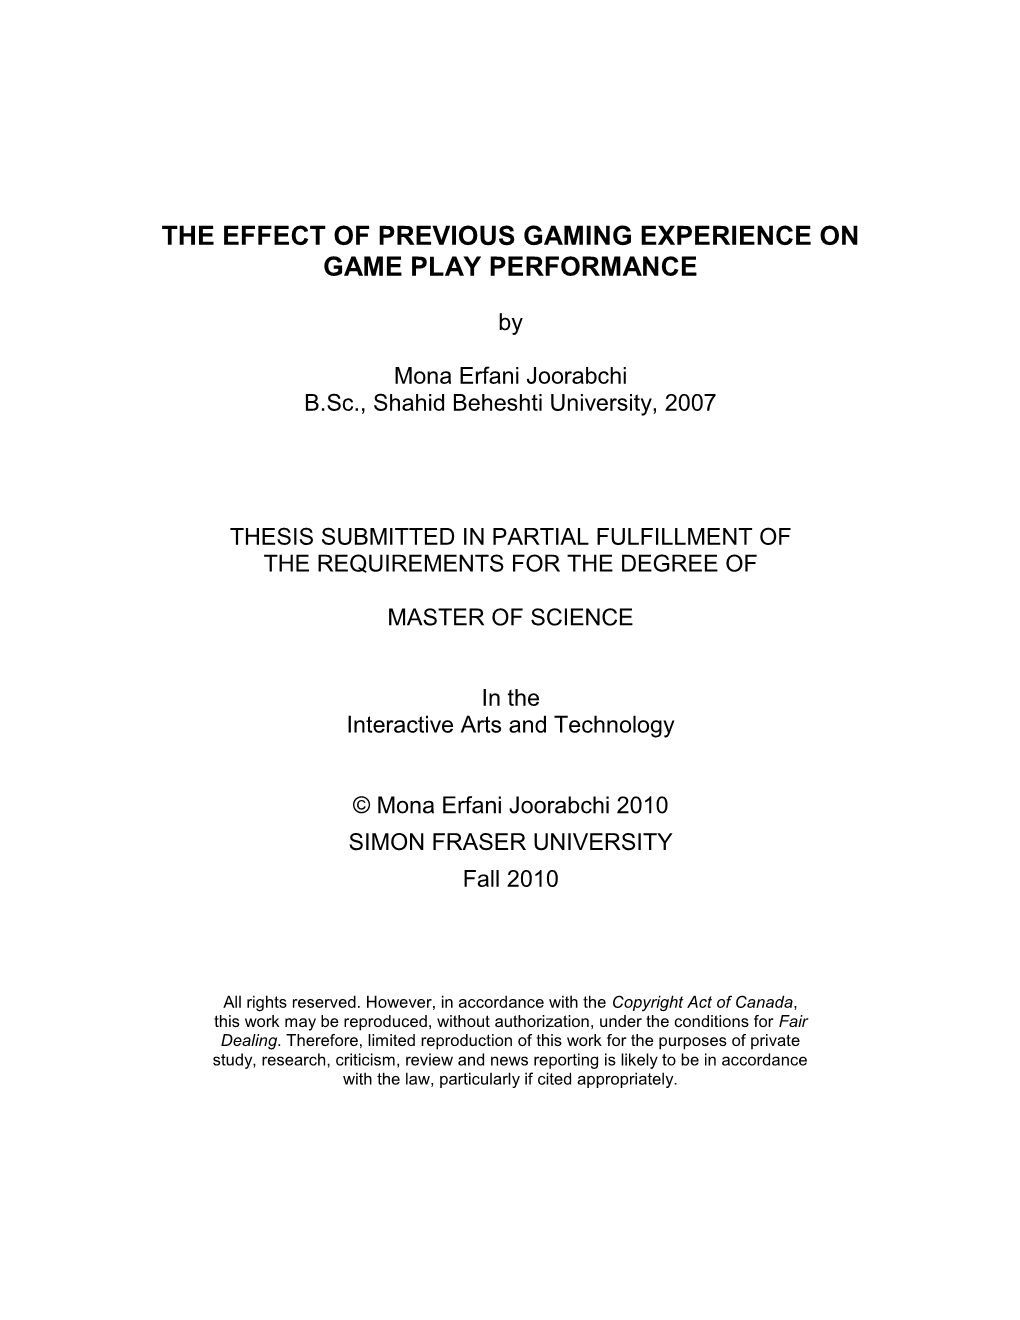 The Effect of Previous Gaming Experience on Game Play Performance